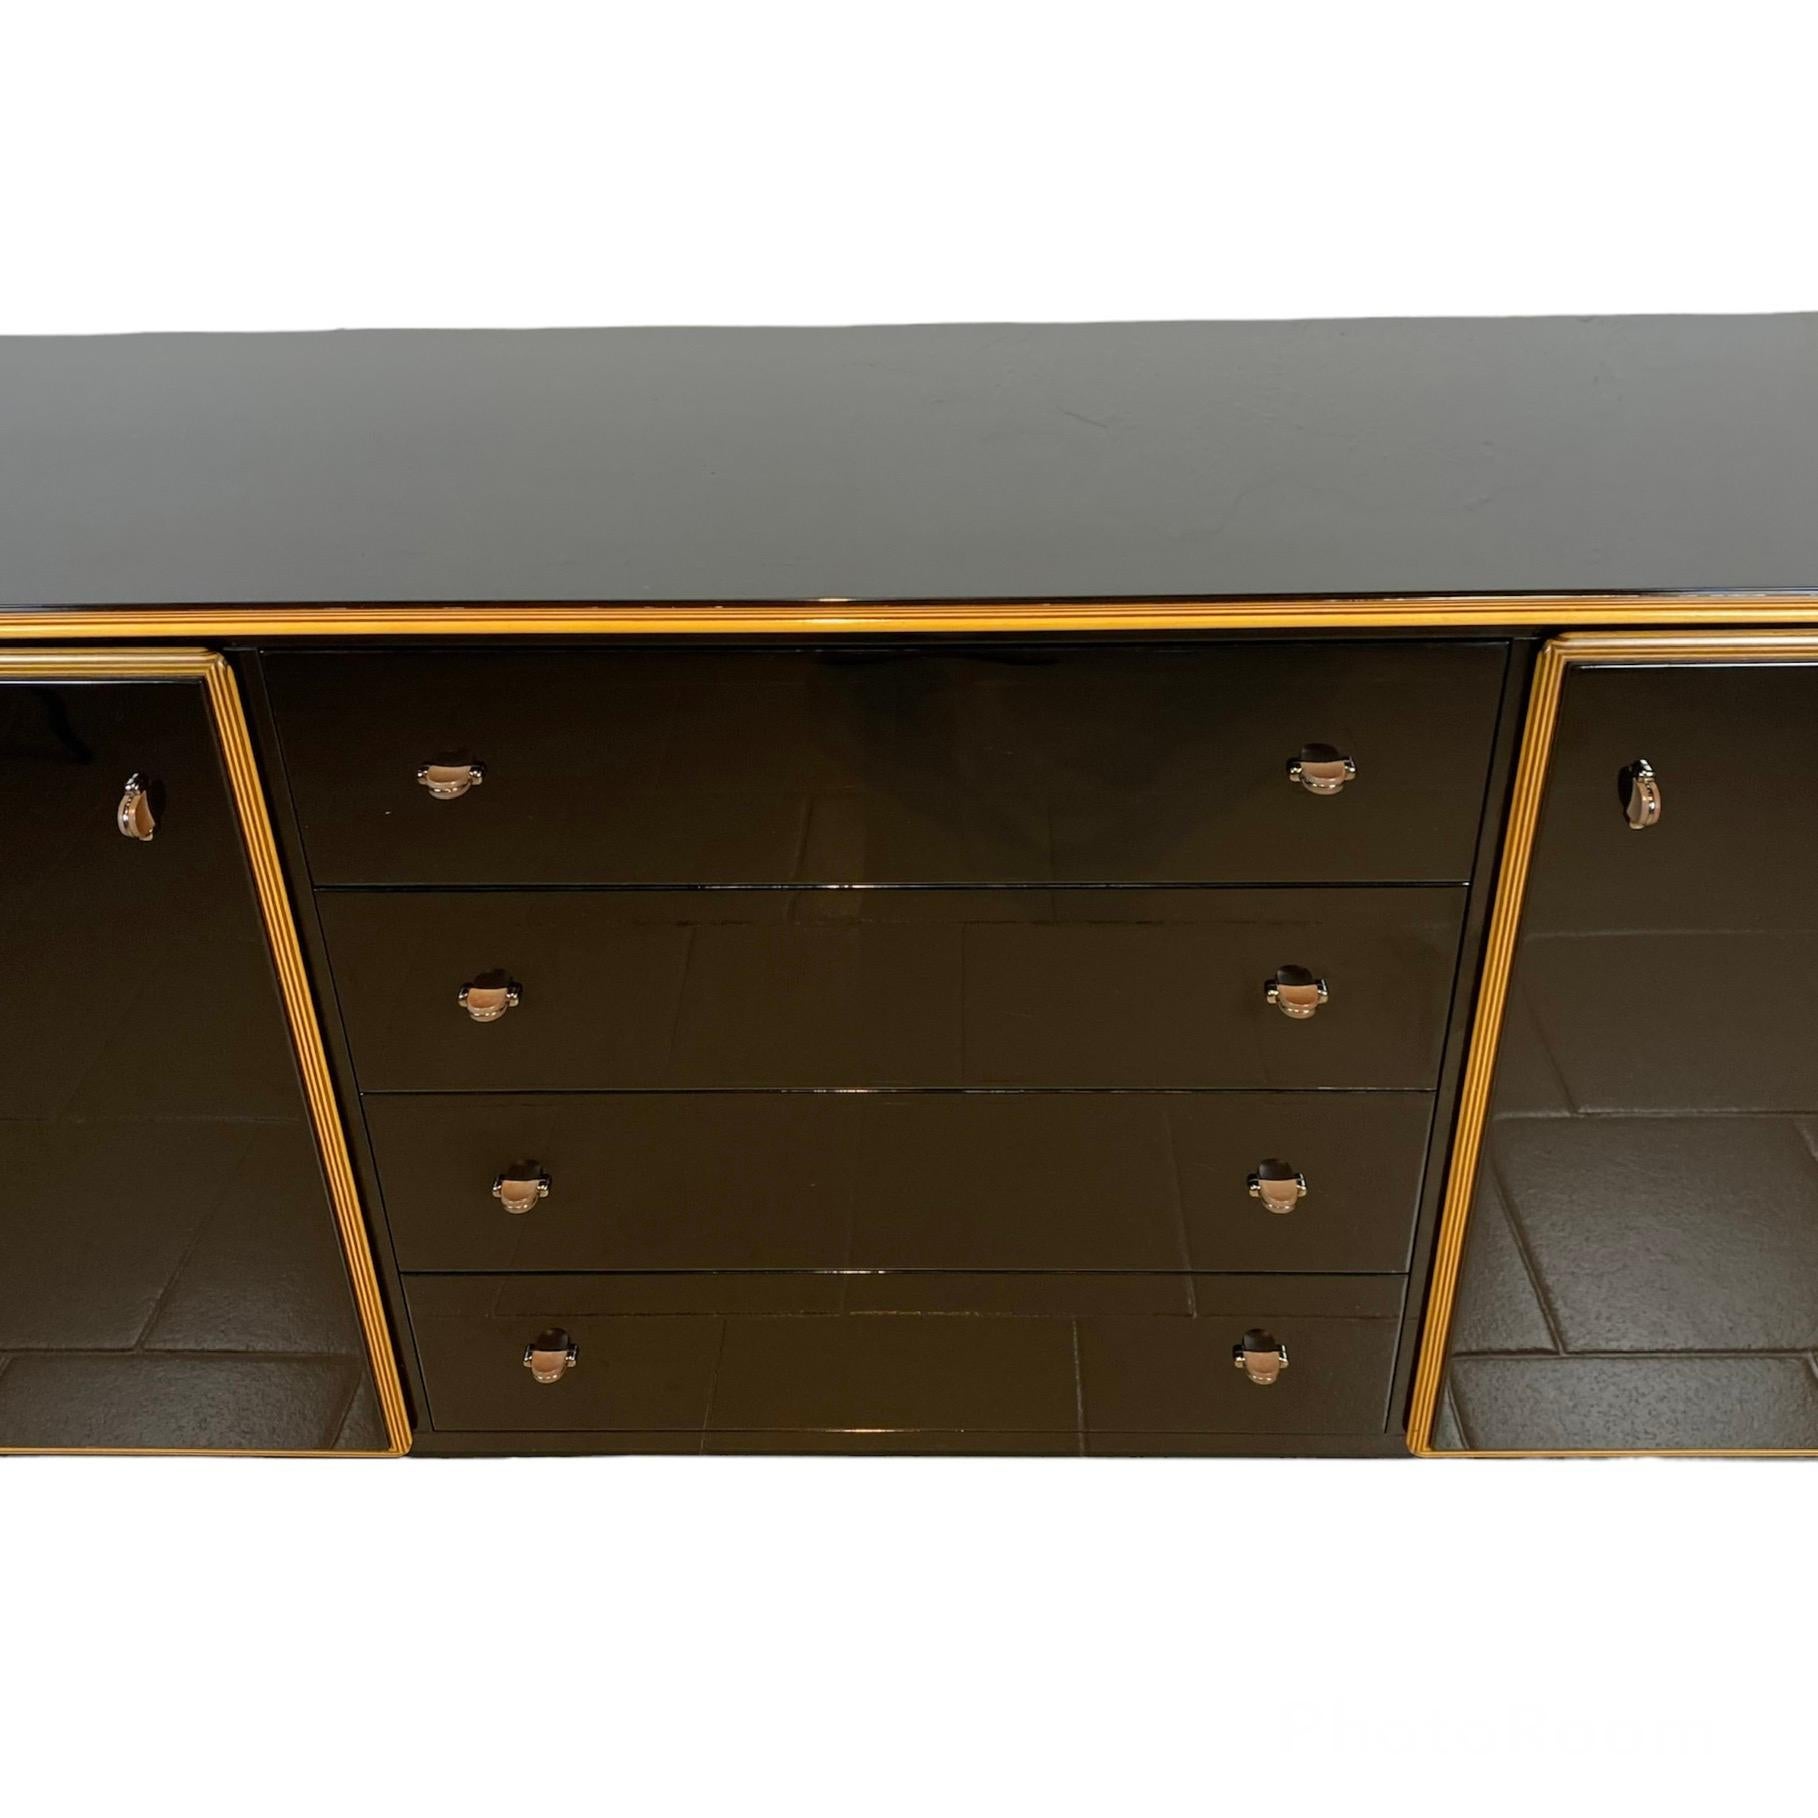 Late 20th Century Pierre Cardin Black Lacquered Sideboard with Shaped Wood